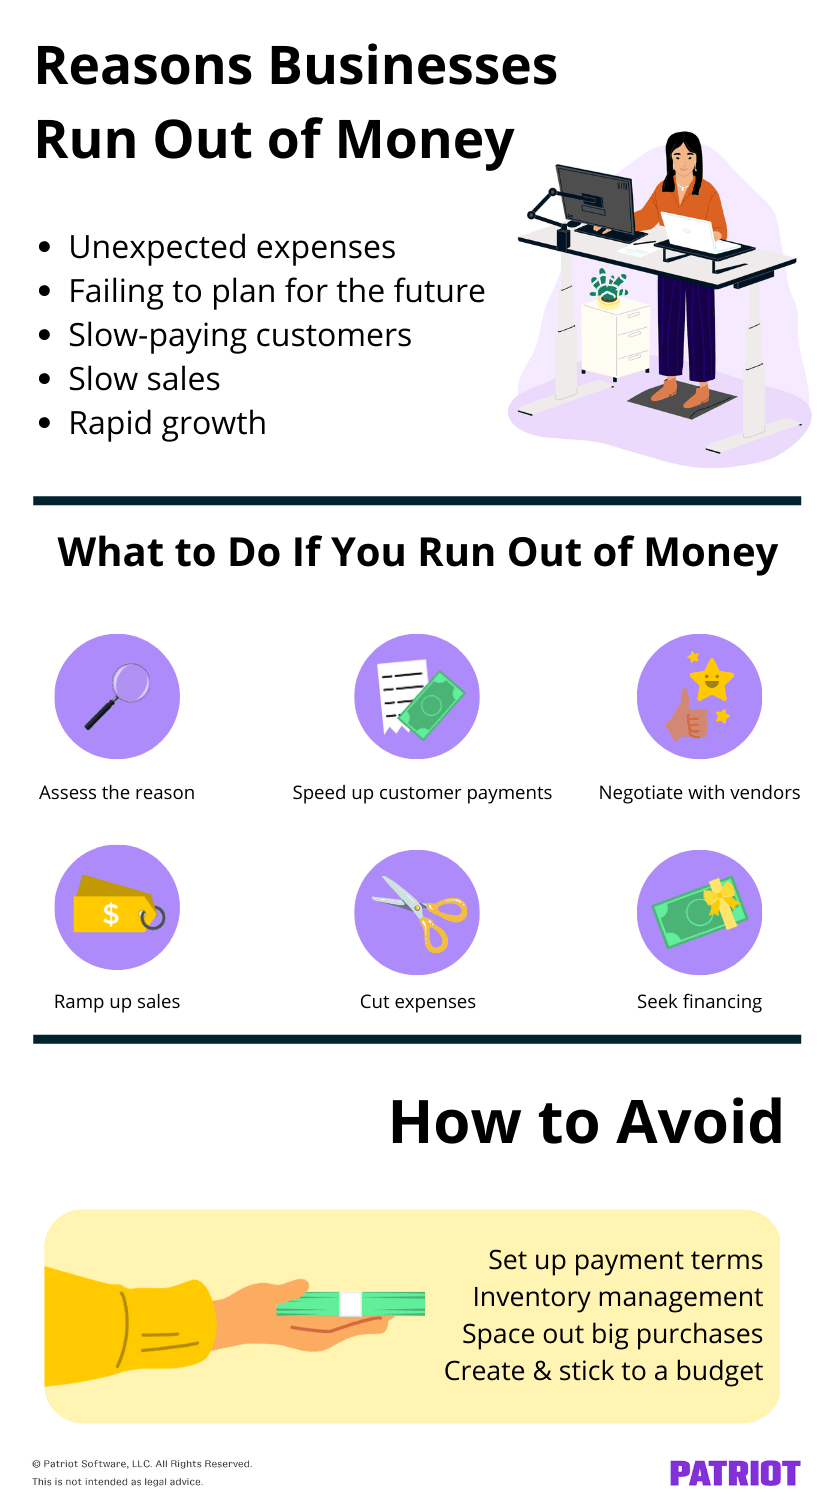 Reasons businesses run out of money, what to do if you run out of money, and how to avoid